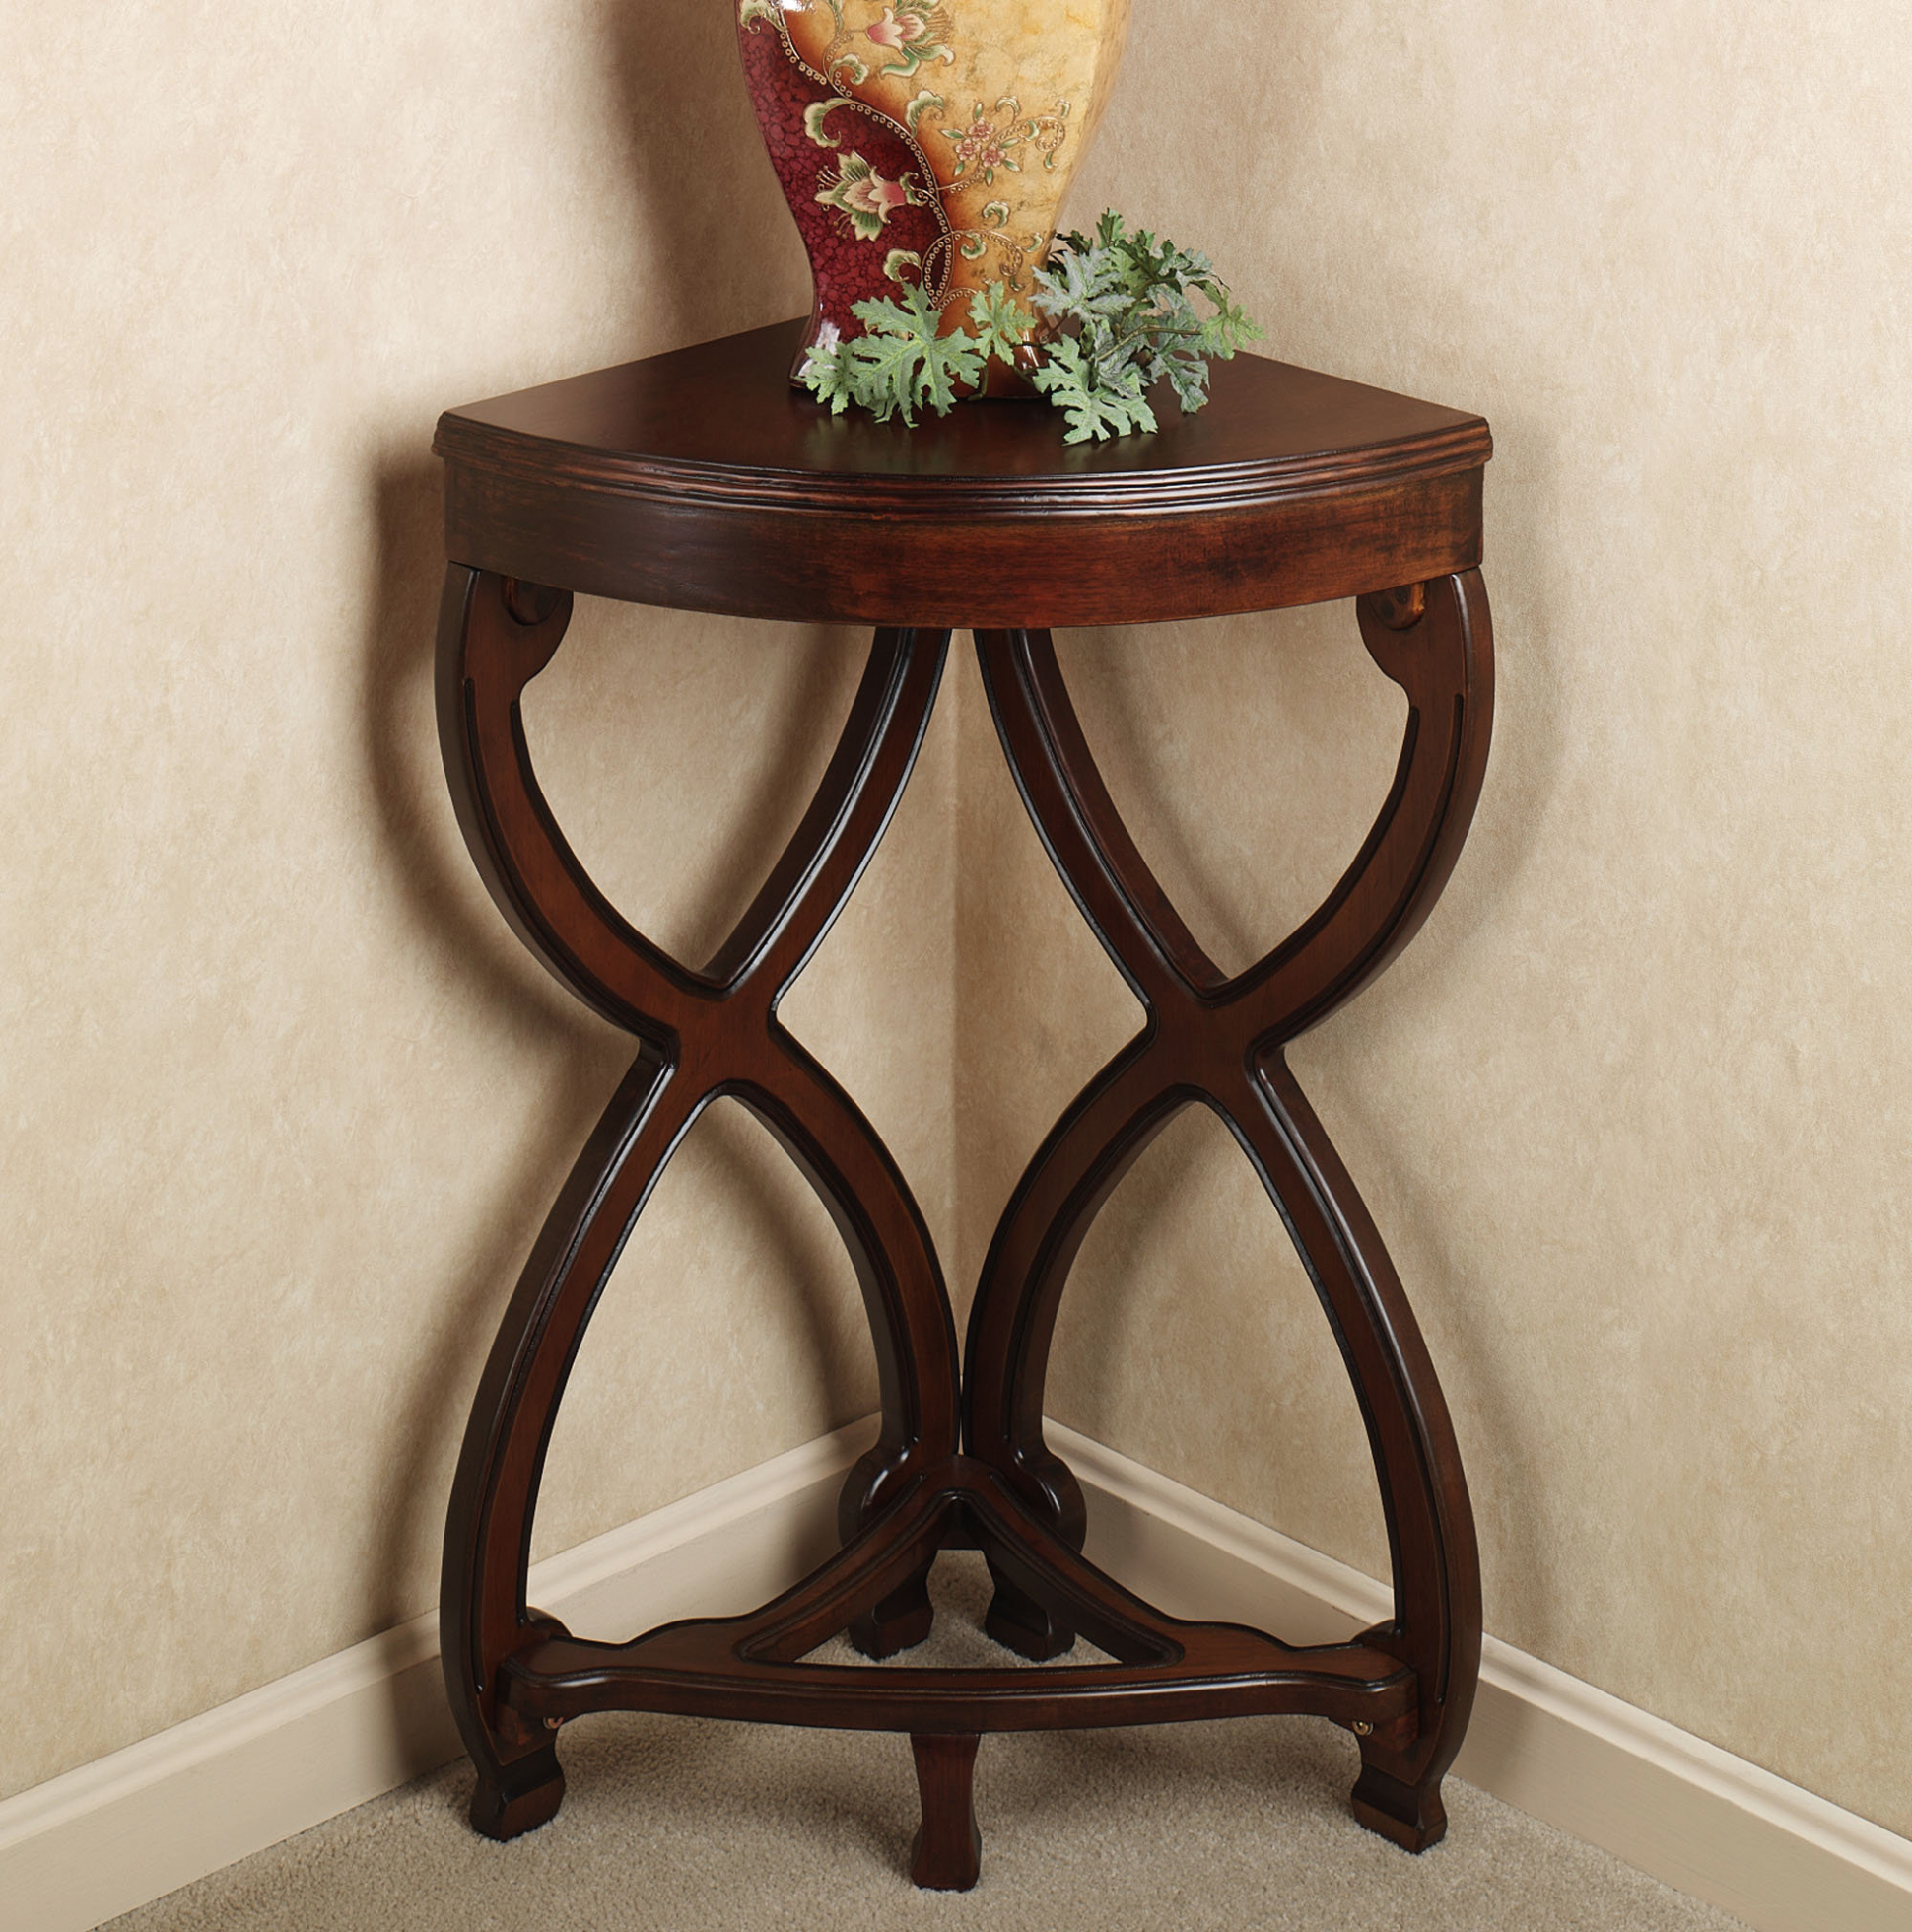 living room unique corner accent table for dining ninan pertaining cool your house decor wood patio end bird decorations home narrow hallway building barn door ashley furniture